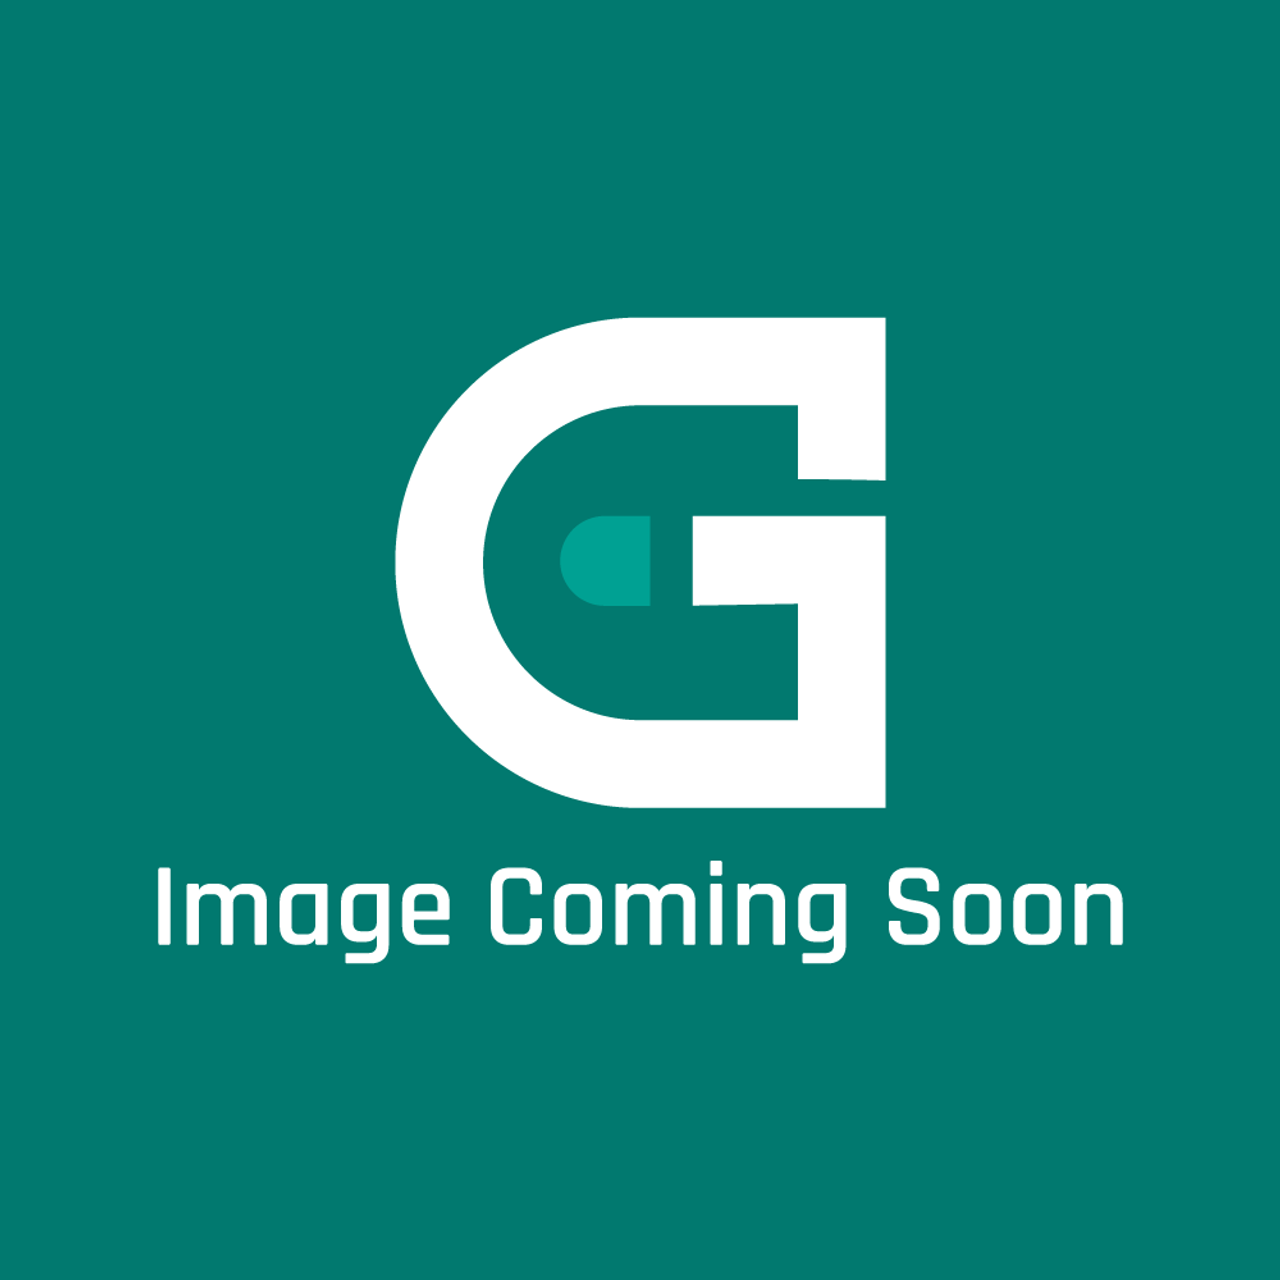 Frigidaire - Electrolux 316201860 Panel - Image Coming Soon!